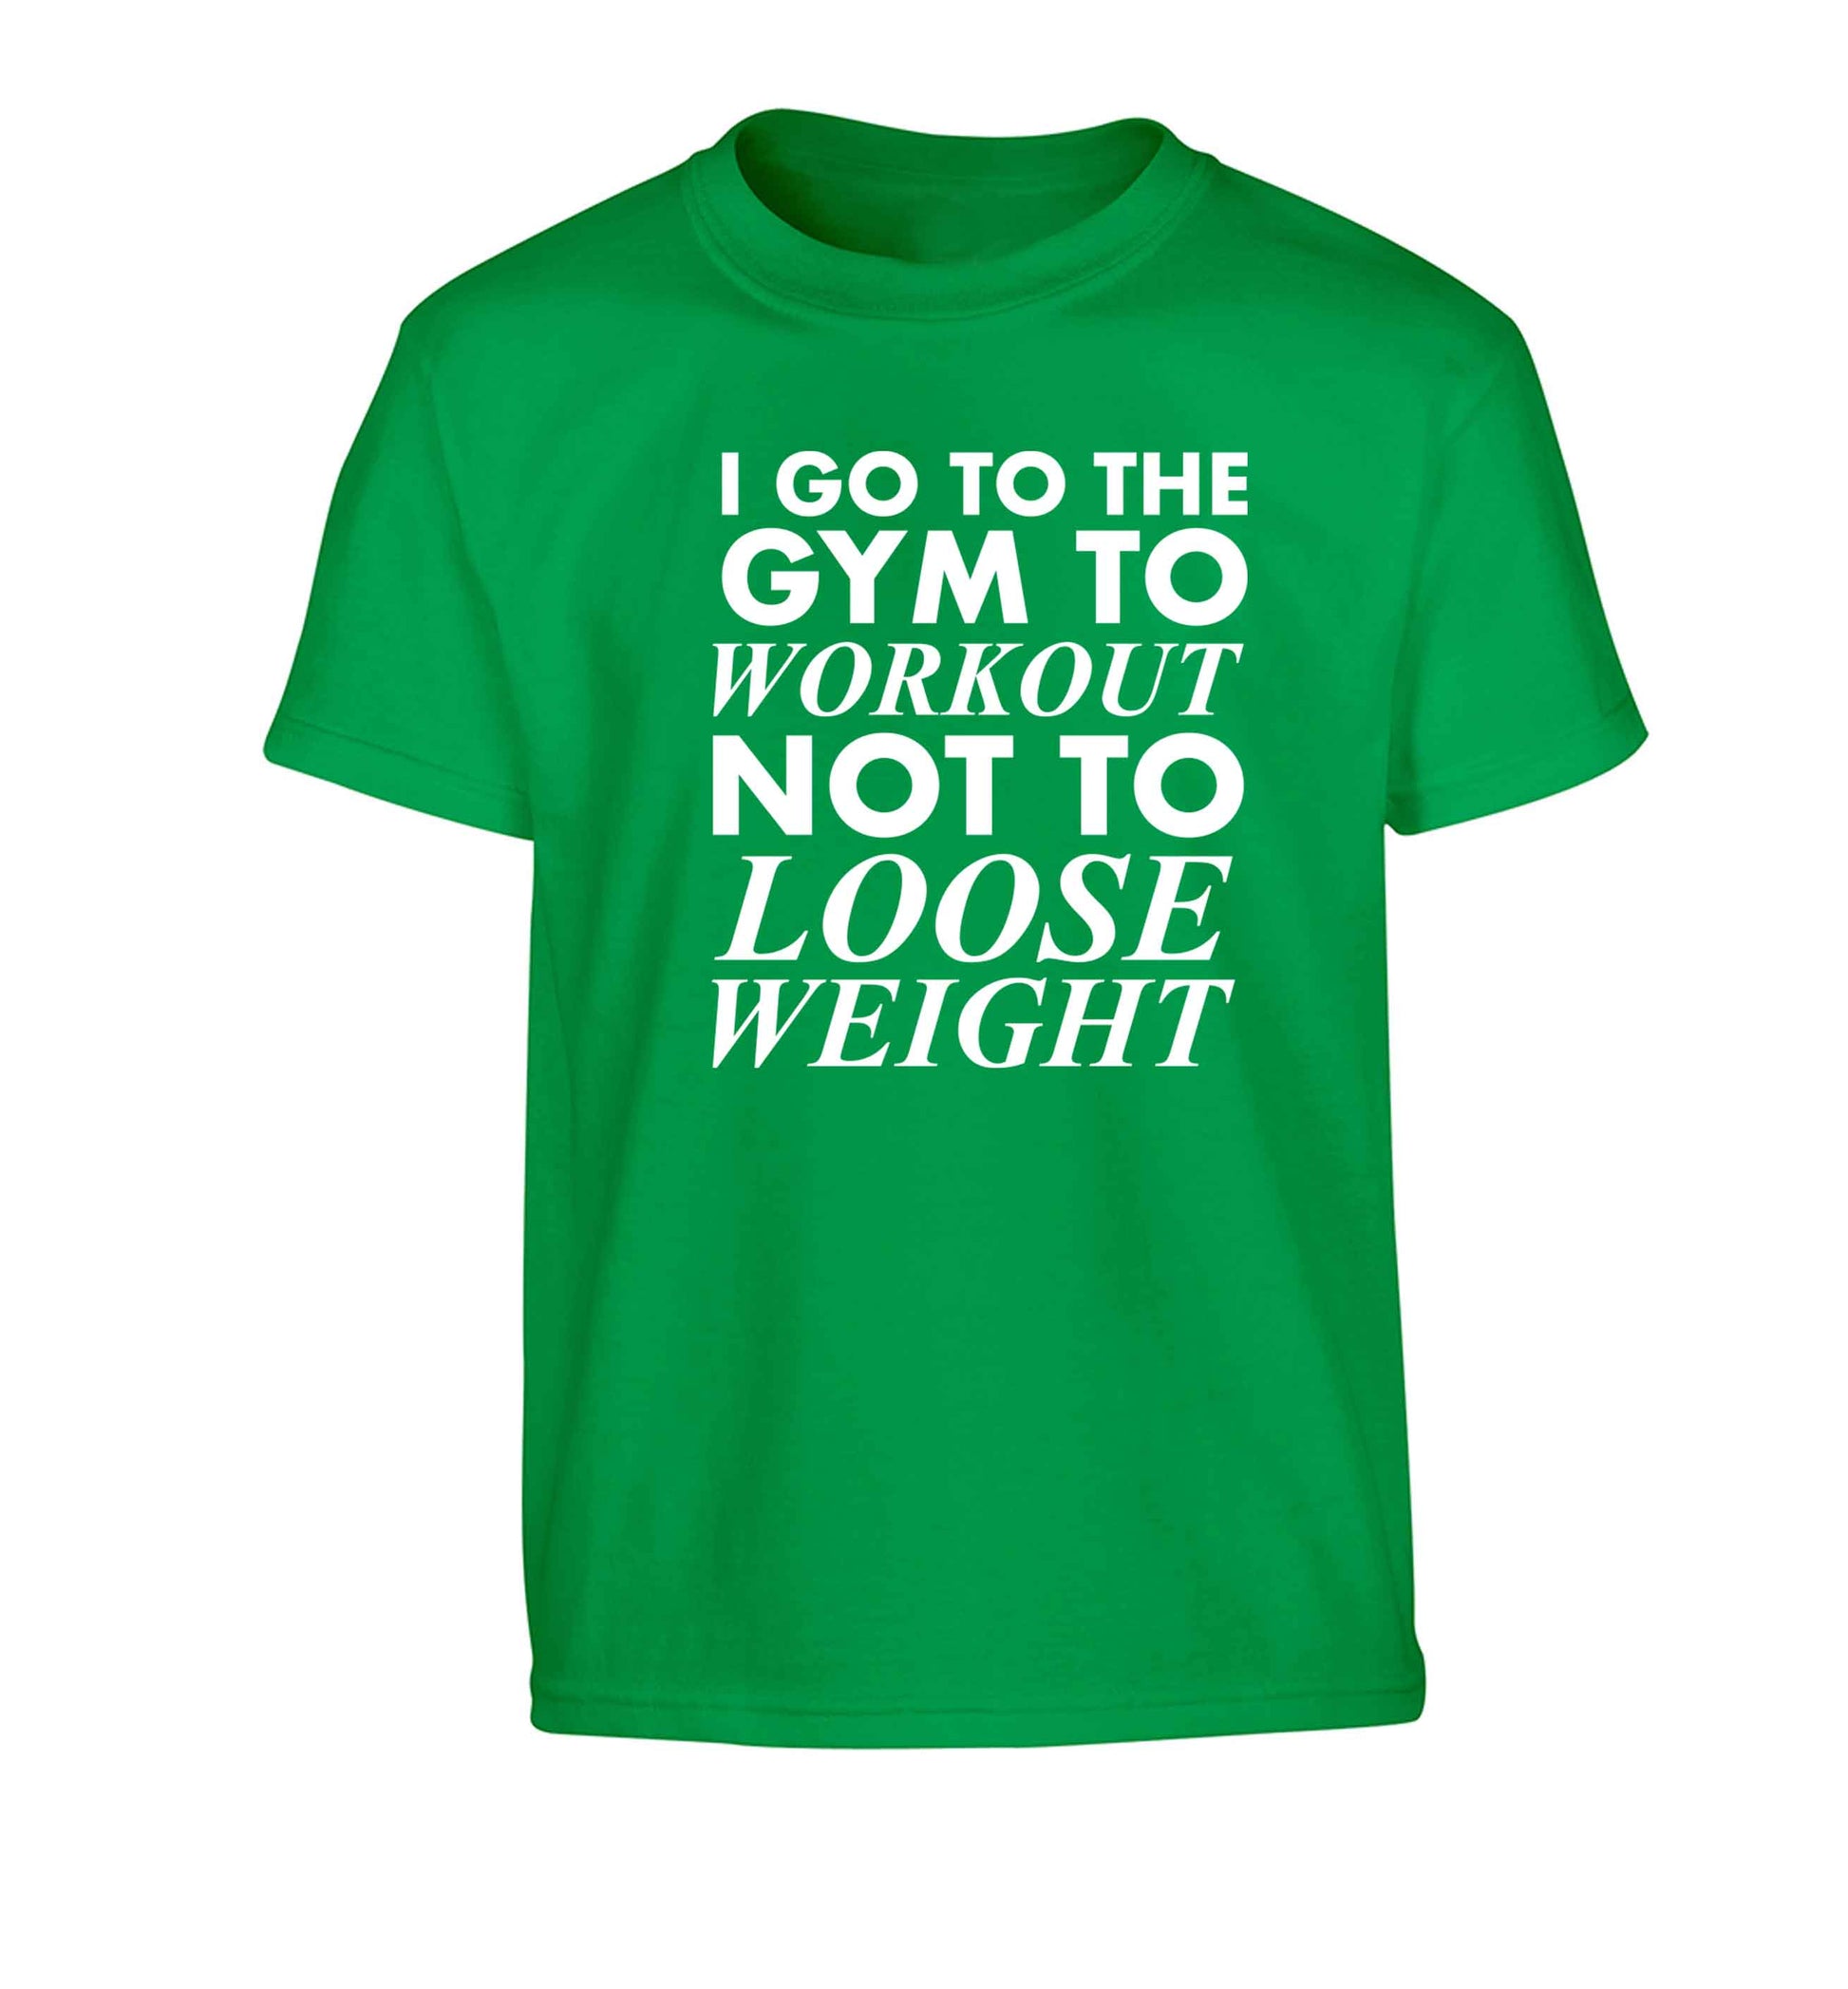 I go to the gym to workout not to loose weight Children's green Tshirt 12-13 Years